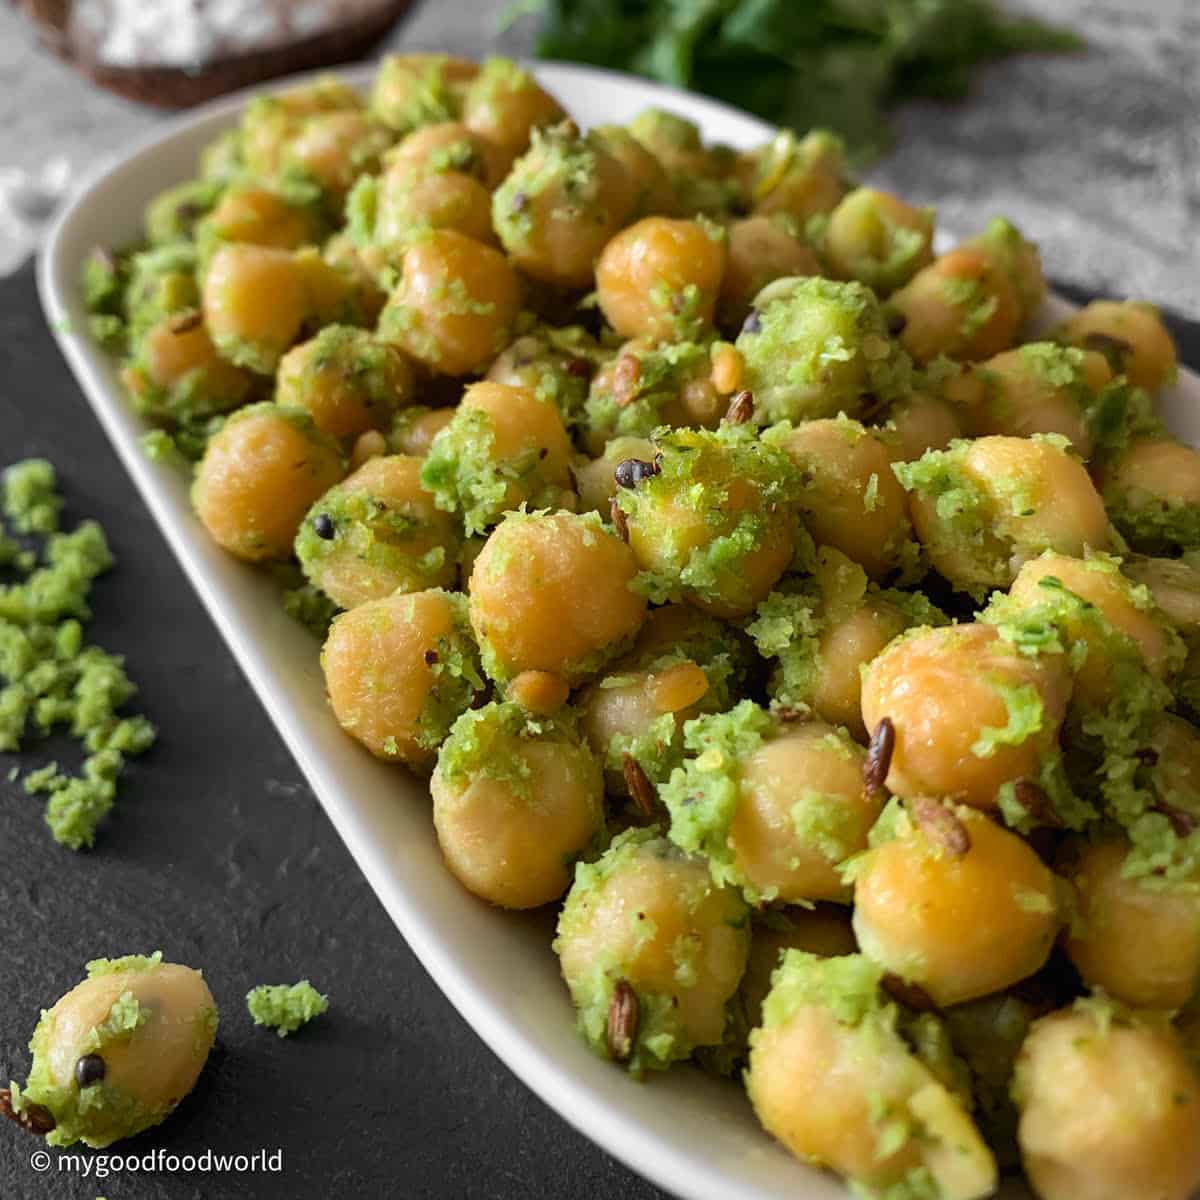 Cooked whole chickpeas salad with garnish of fried cumin, mustard seeds and white lentils in a green, coconut paste is placed in a white bowl-plate.